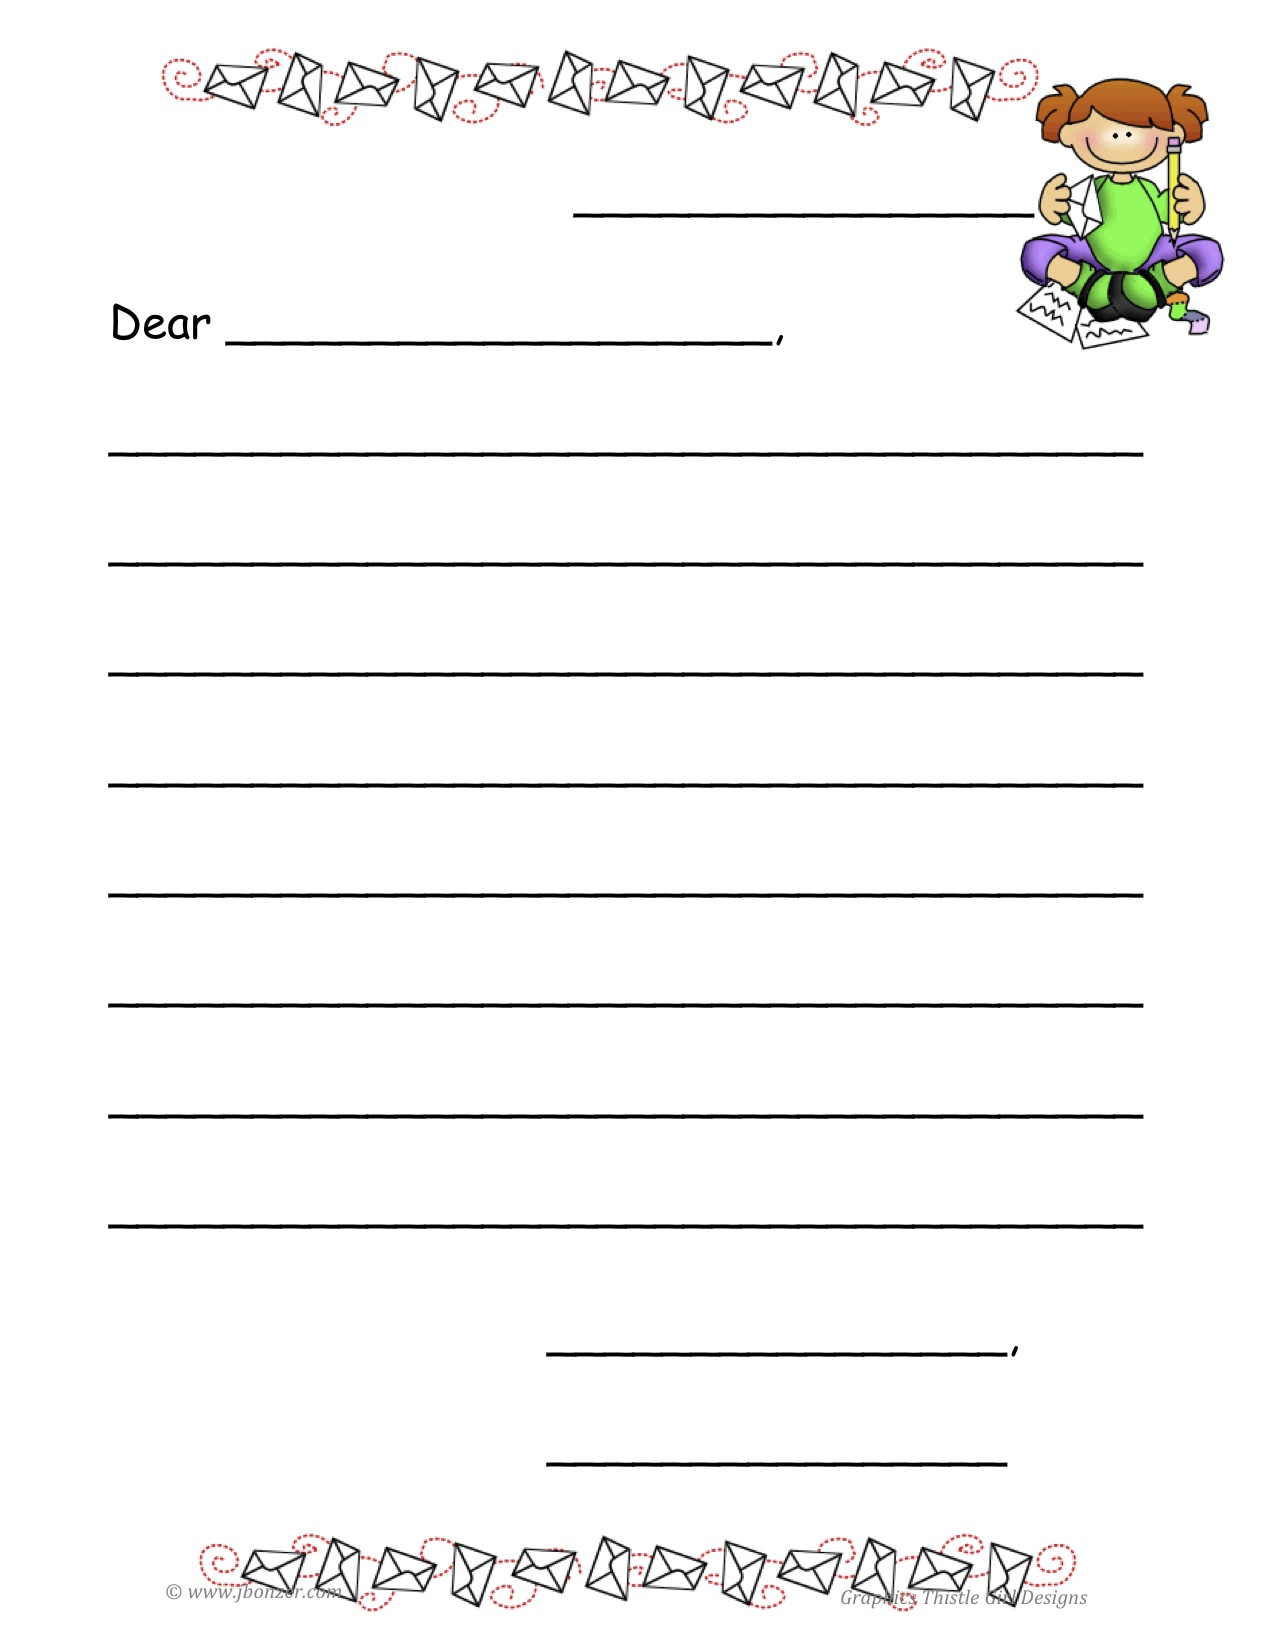 17 Best Images About Writing A Letter On Pinterest Picture Pertaining To Letter Writing Template For Kids